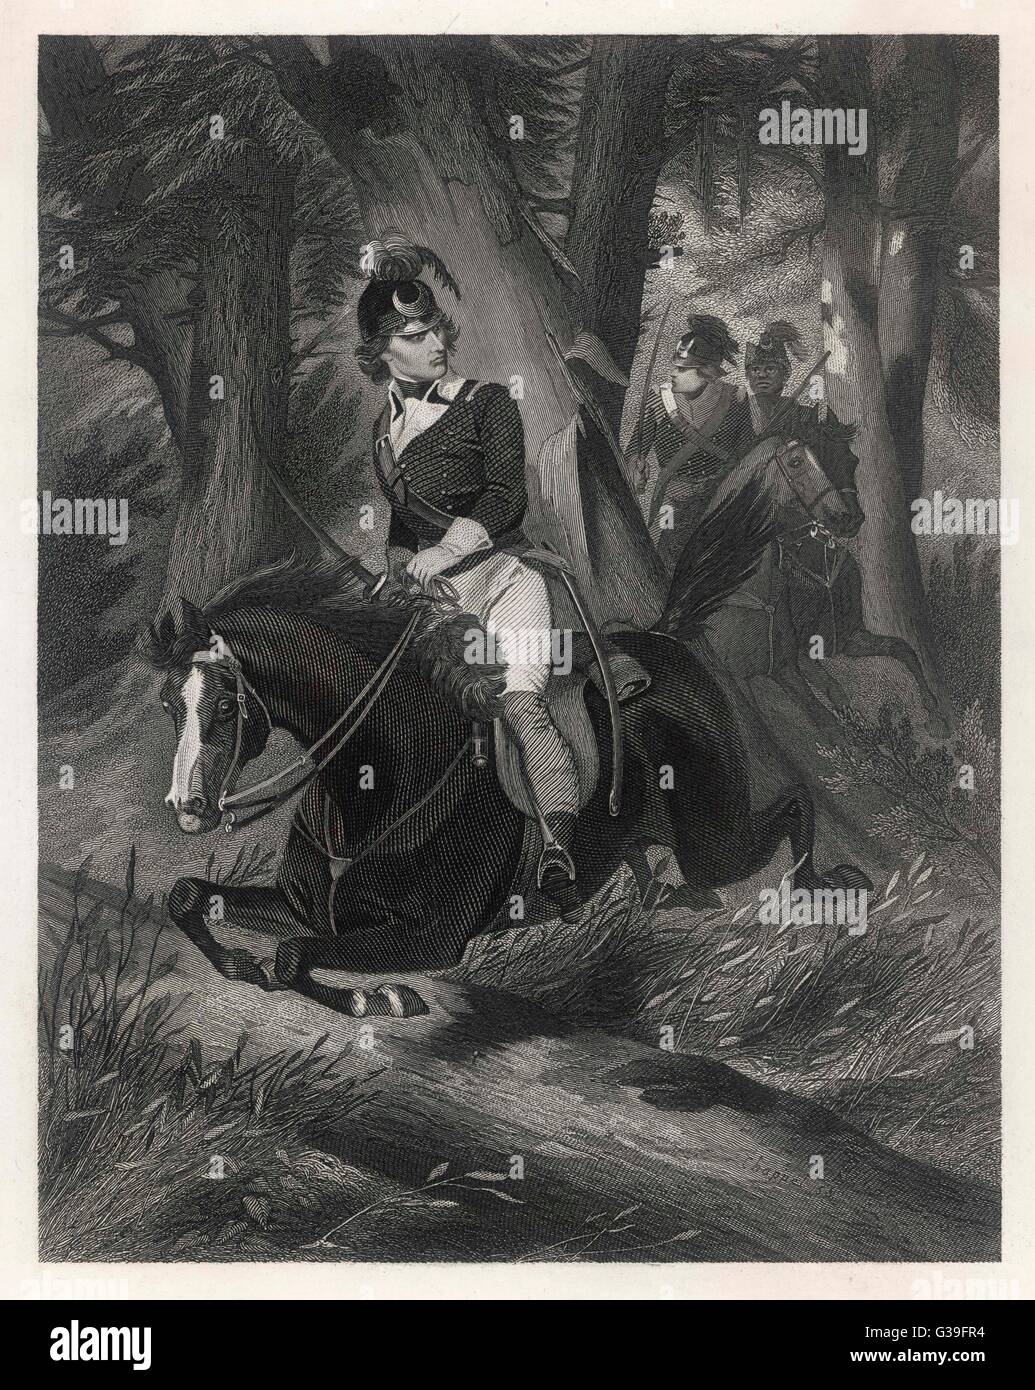 FRANCIS MARION known as 'The Swamp Fox', American Revolutionary  commander and statesman       Date: 1732 - 1795 Stock Photo